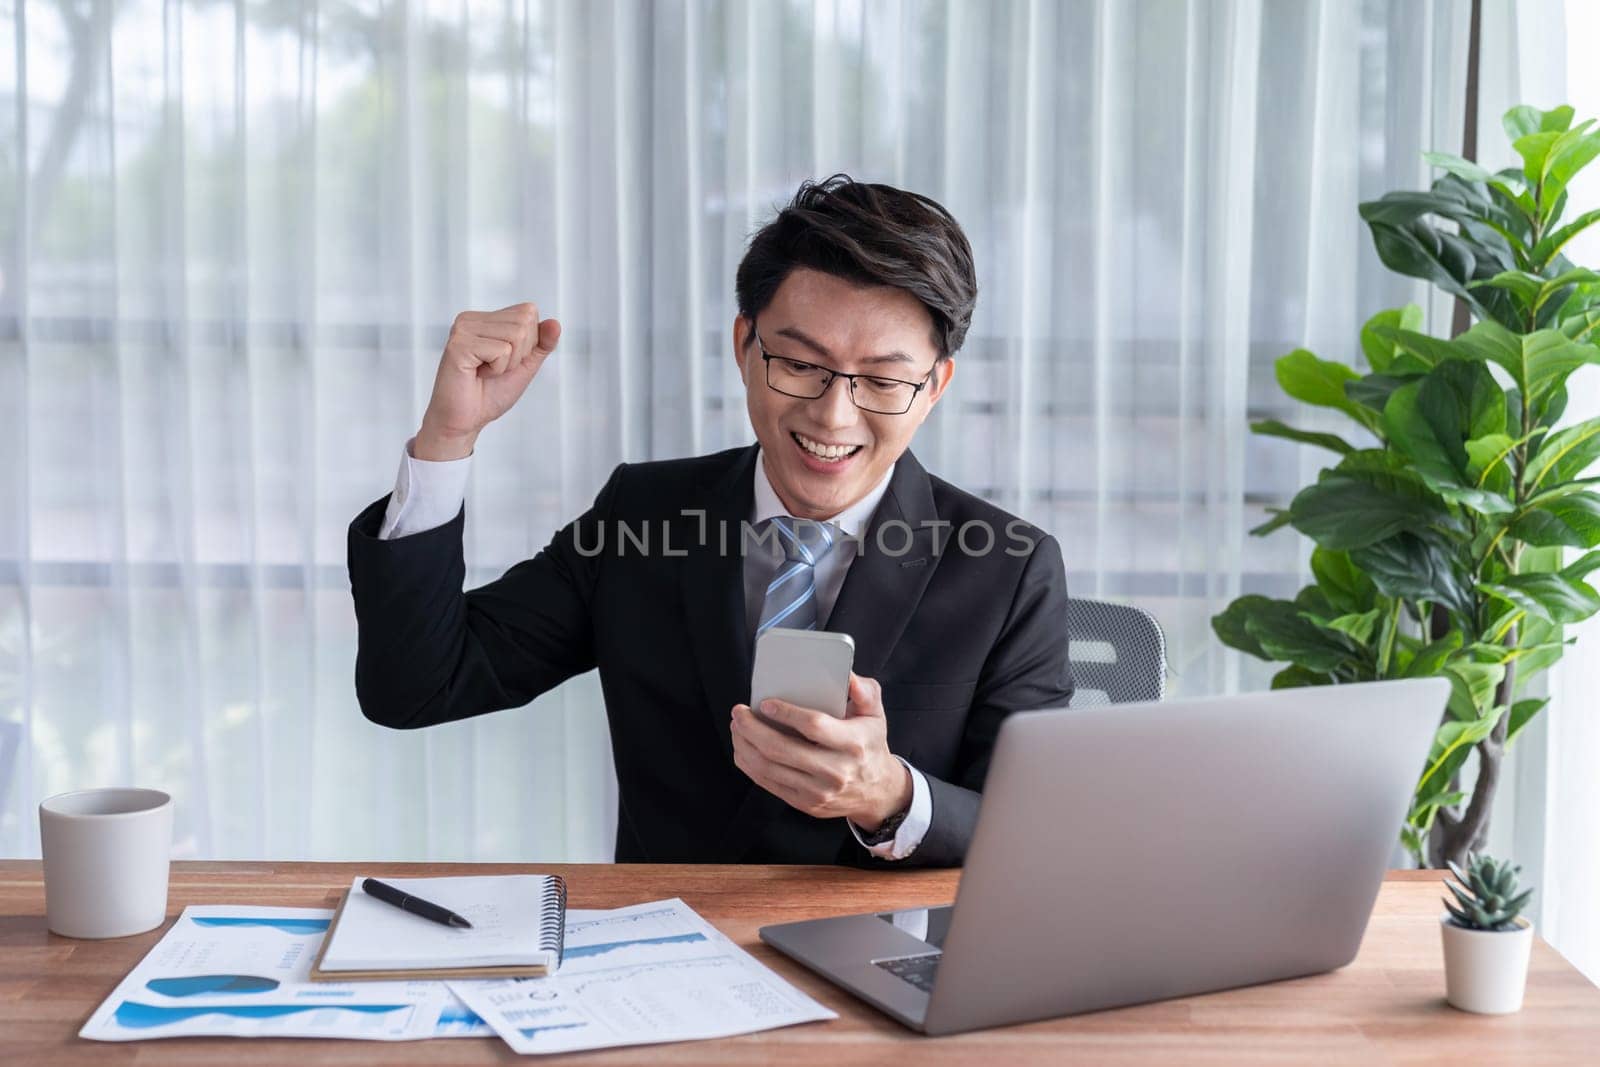 Excited Asian businessman celebrates success at office desk. Happy office worker achieves business goals with data analysis or marketing planning. Business winner celebratory expression. Jubilant